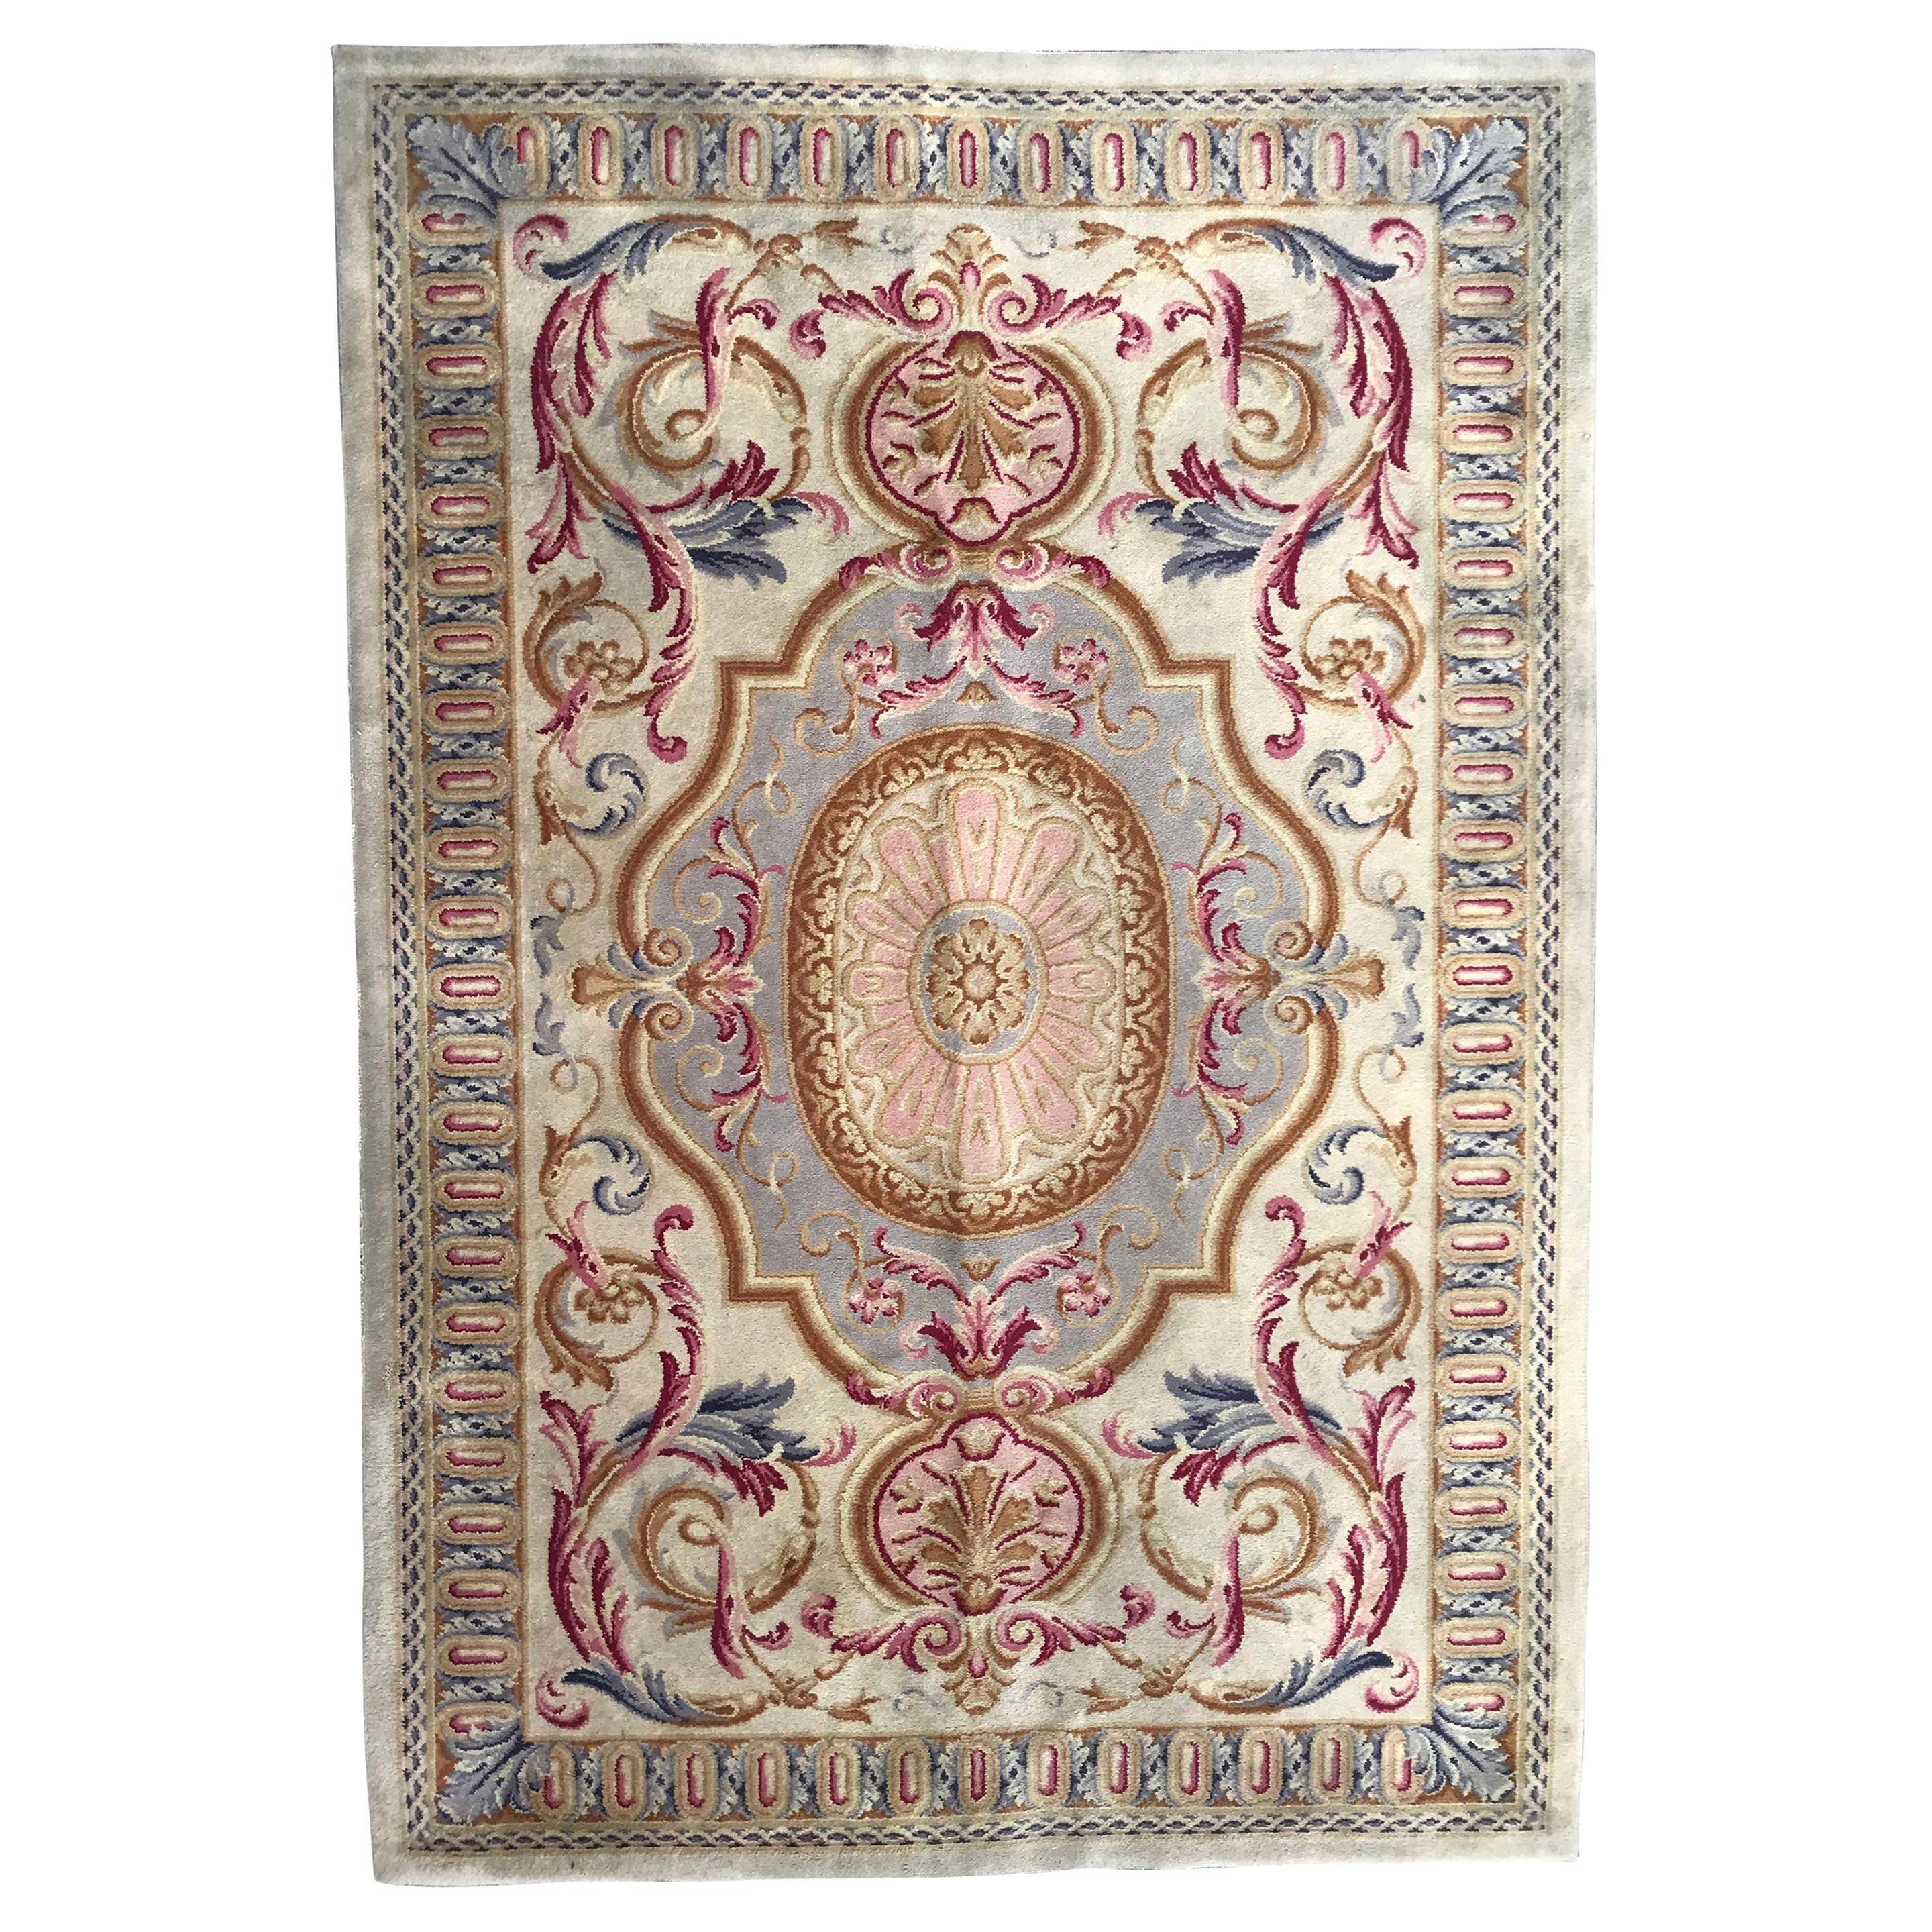 Bobyrug’s Midcentury Knotted Aubusson Savonnerie Design Rug